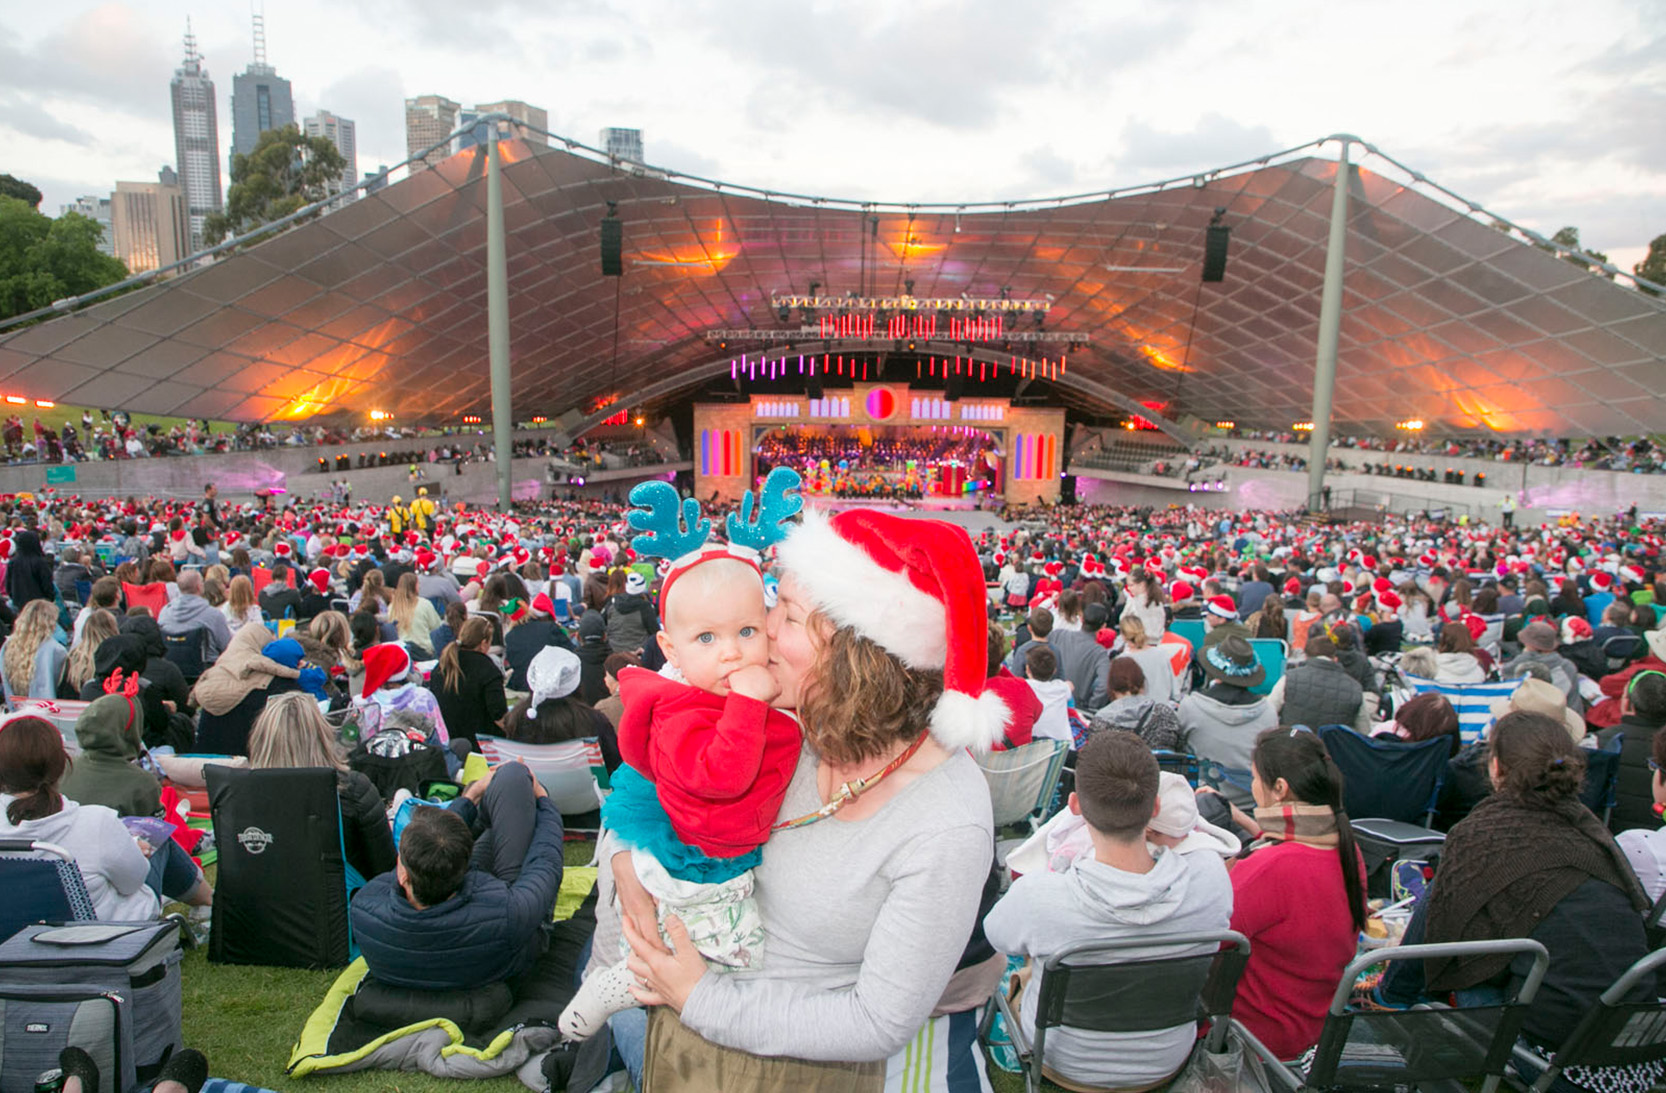 Woman wearing a santa hat kisses a baby with the carols crowd and stage behind them